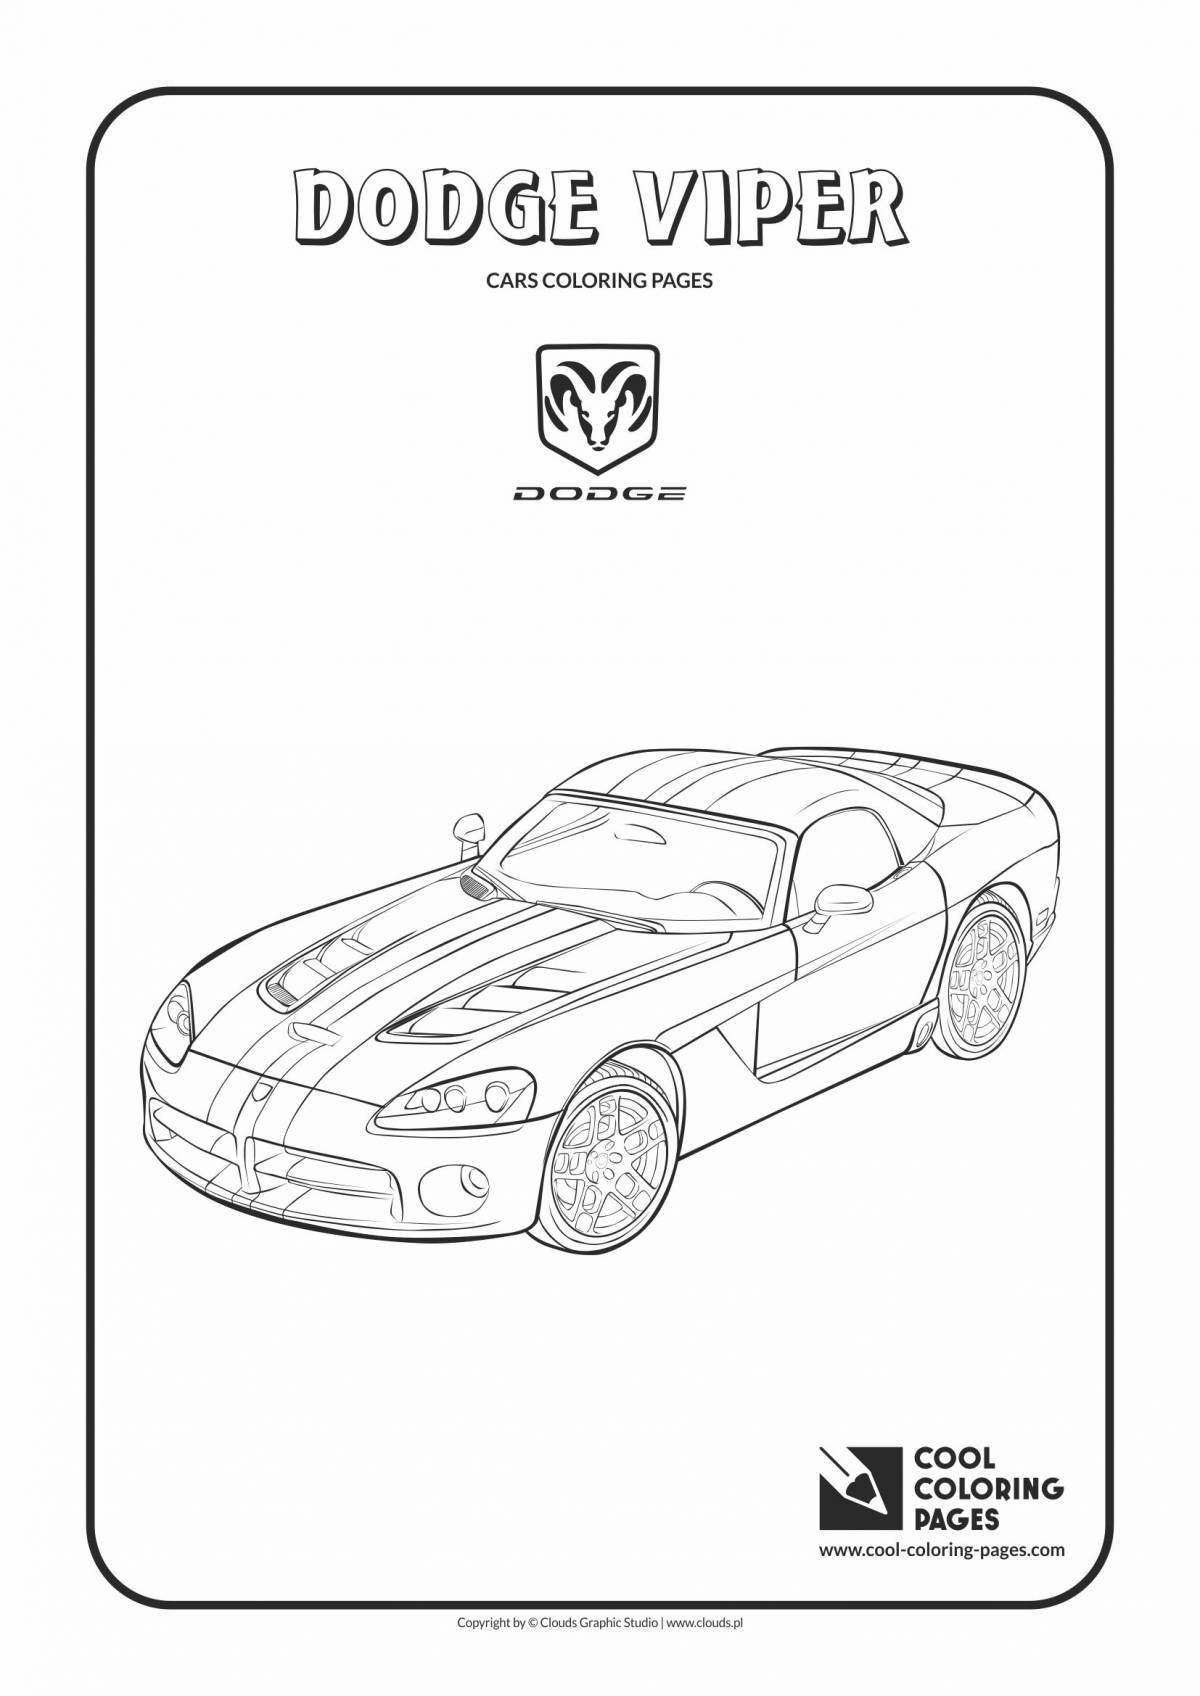 Amazingly detailed dodge viper coloring page